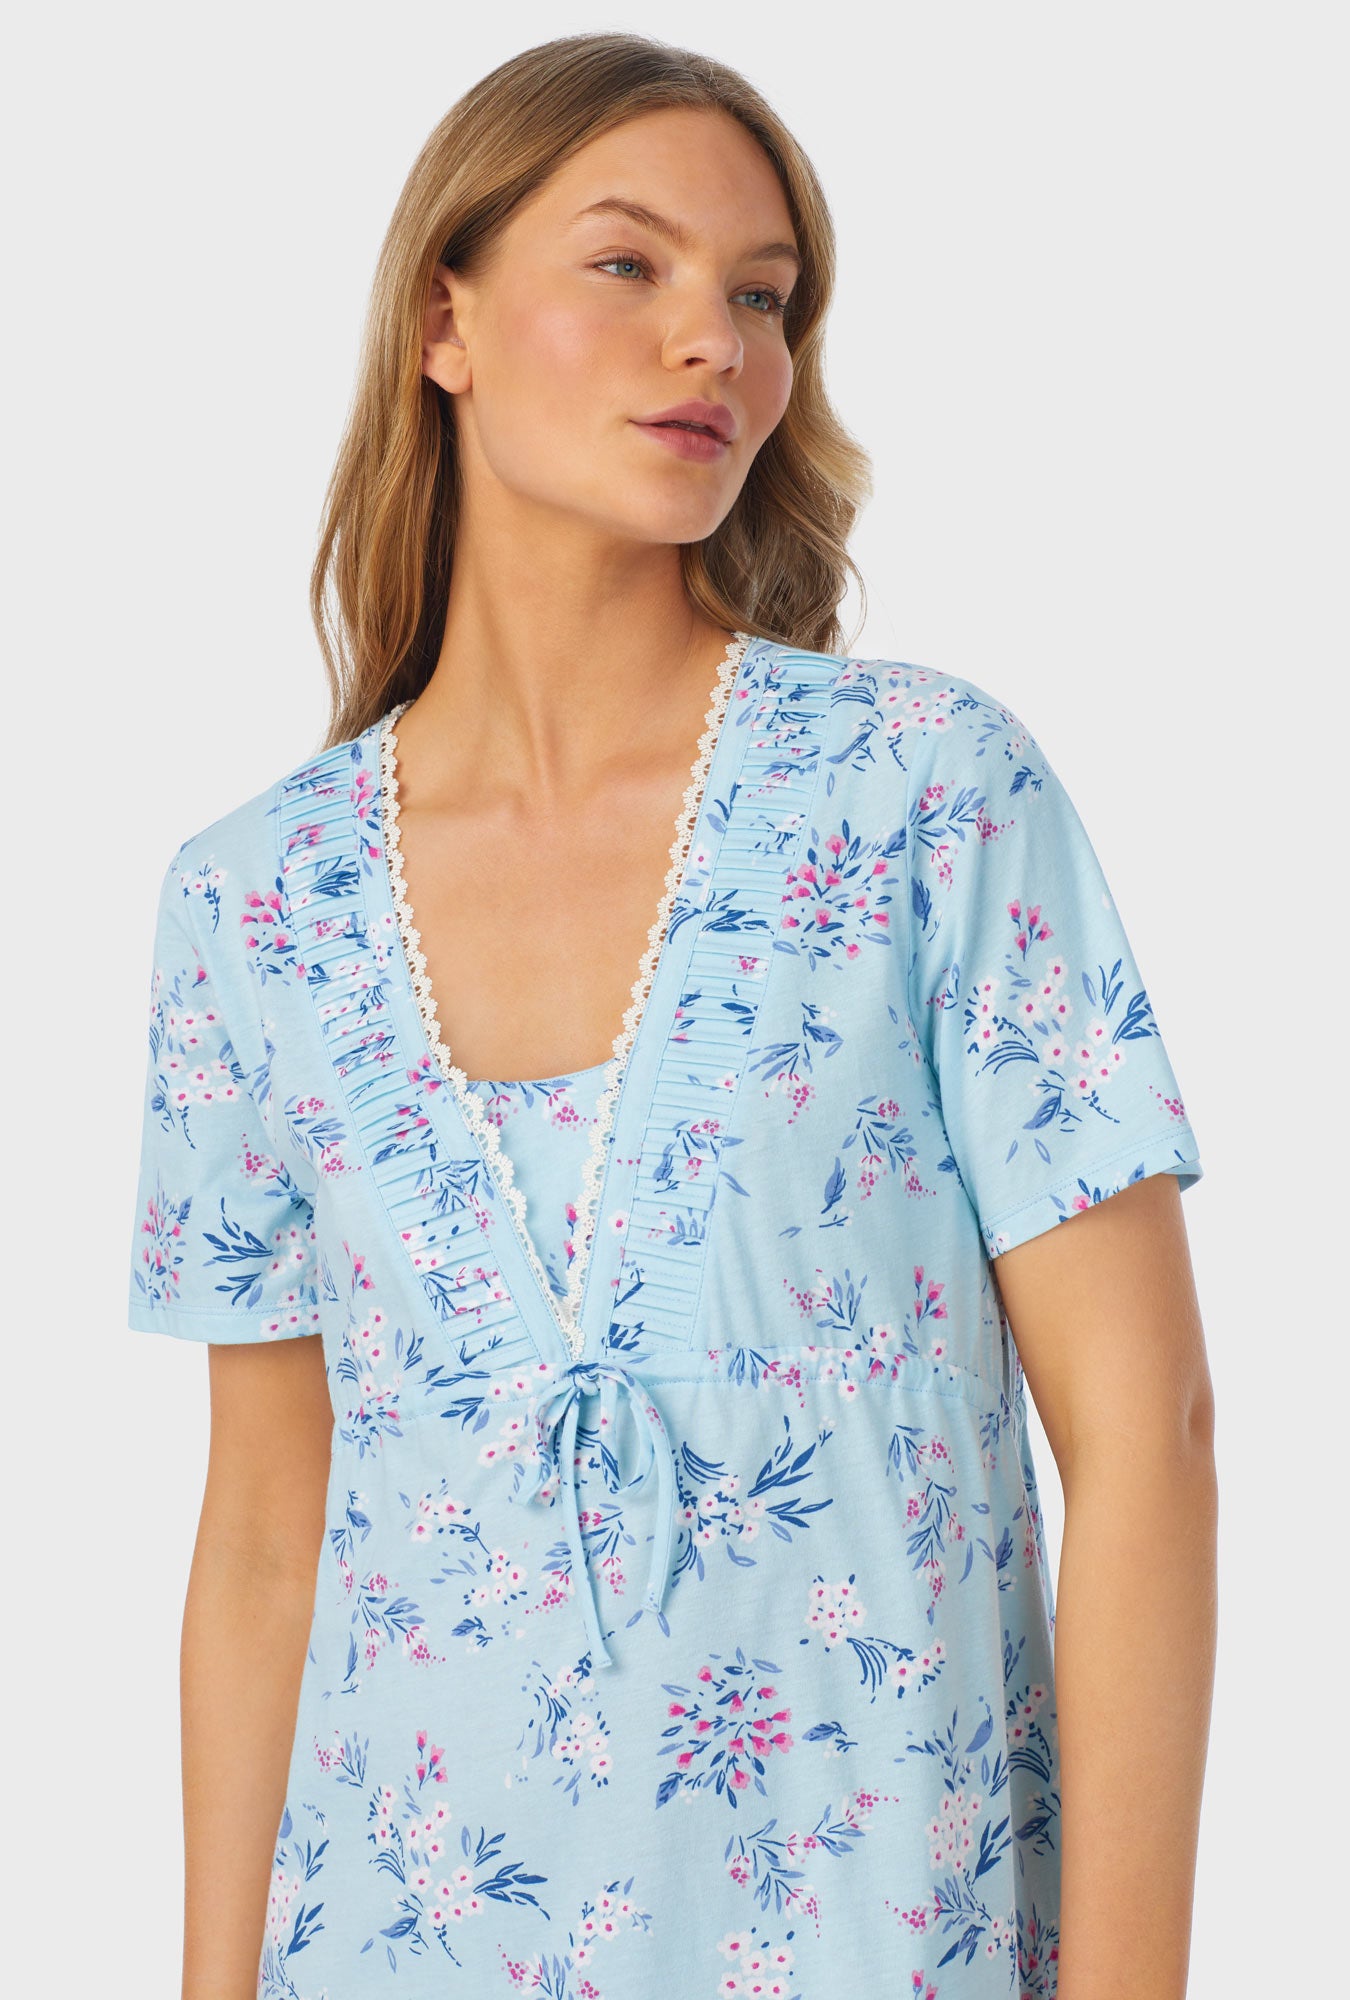 A lady wearing a blue short sleeve waltz nightgown with summer blooms print.